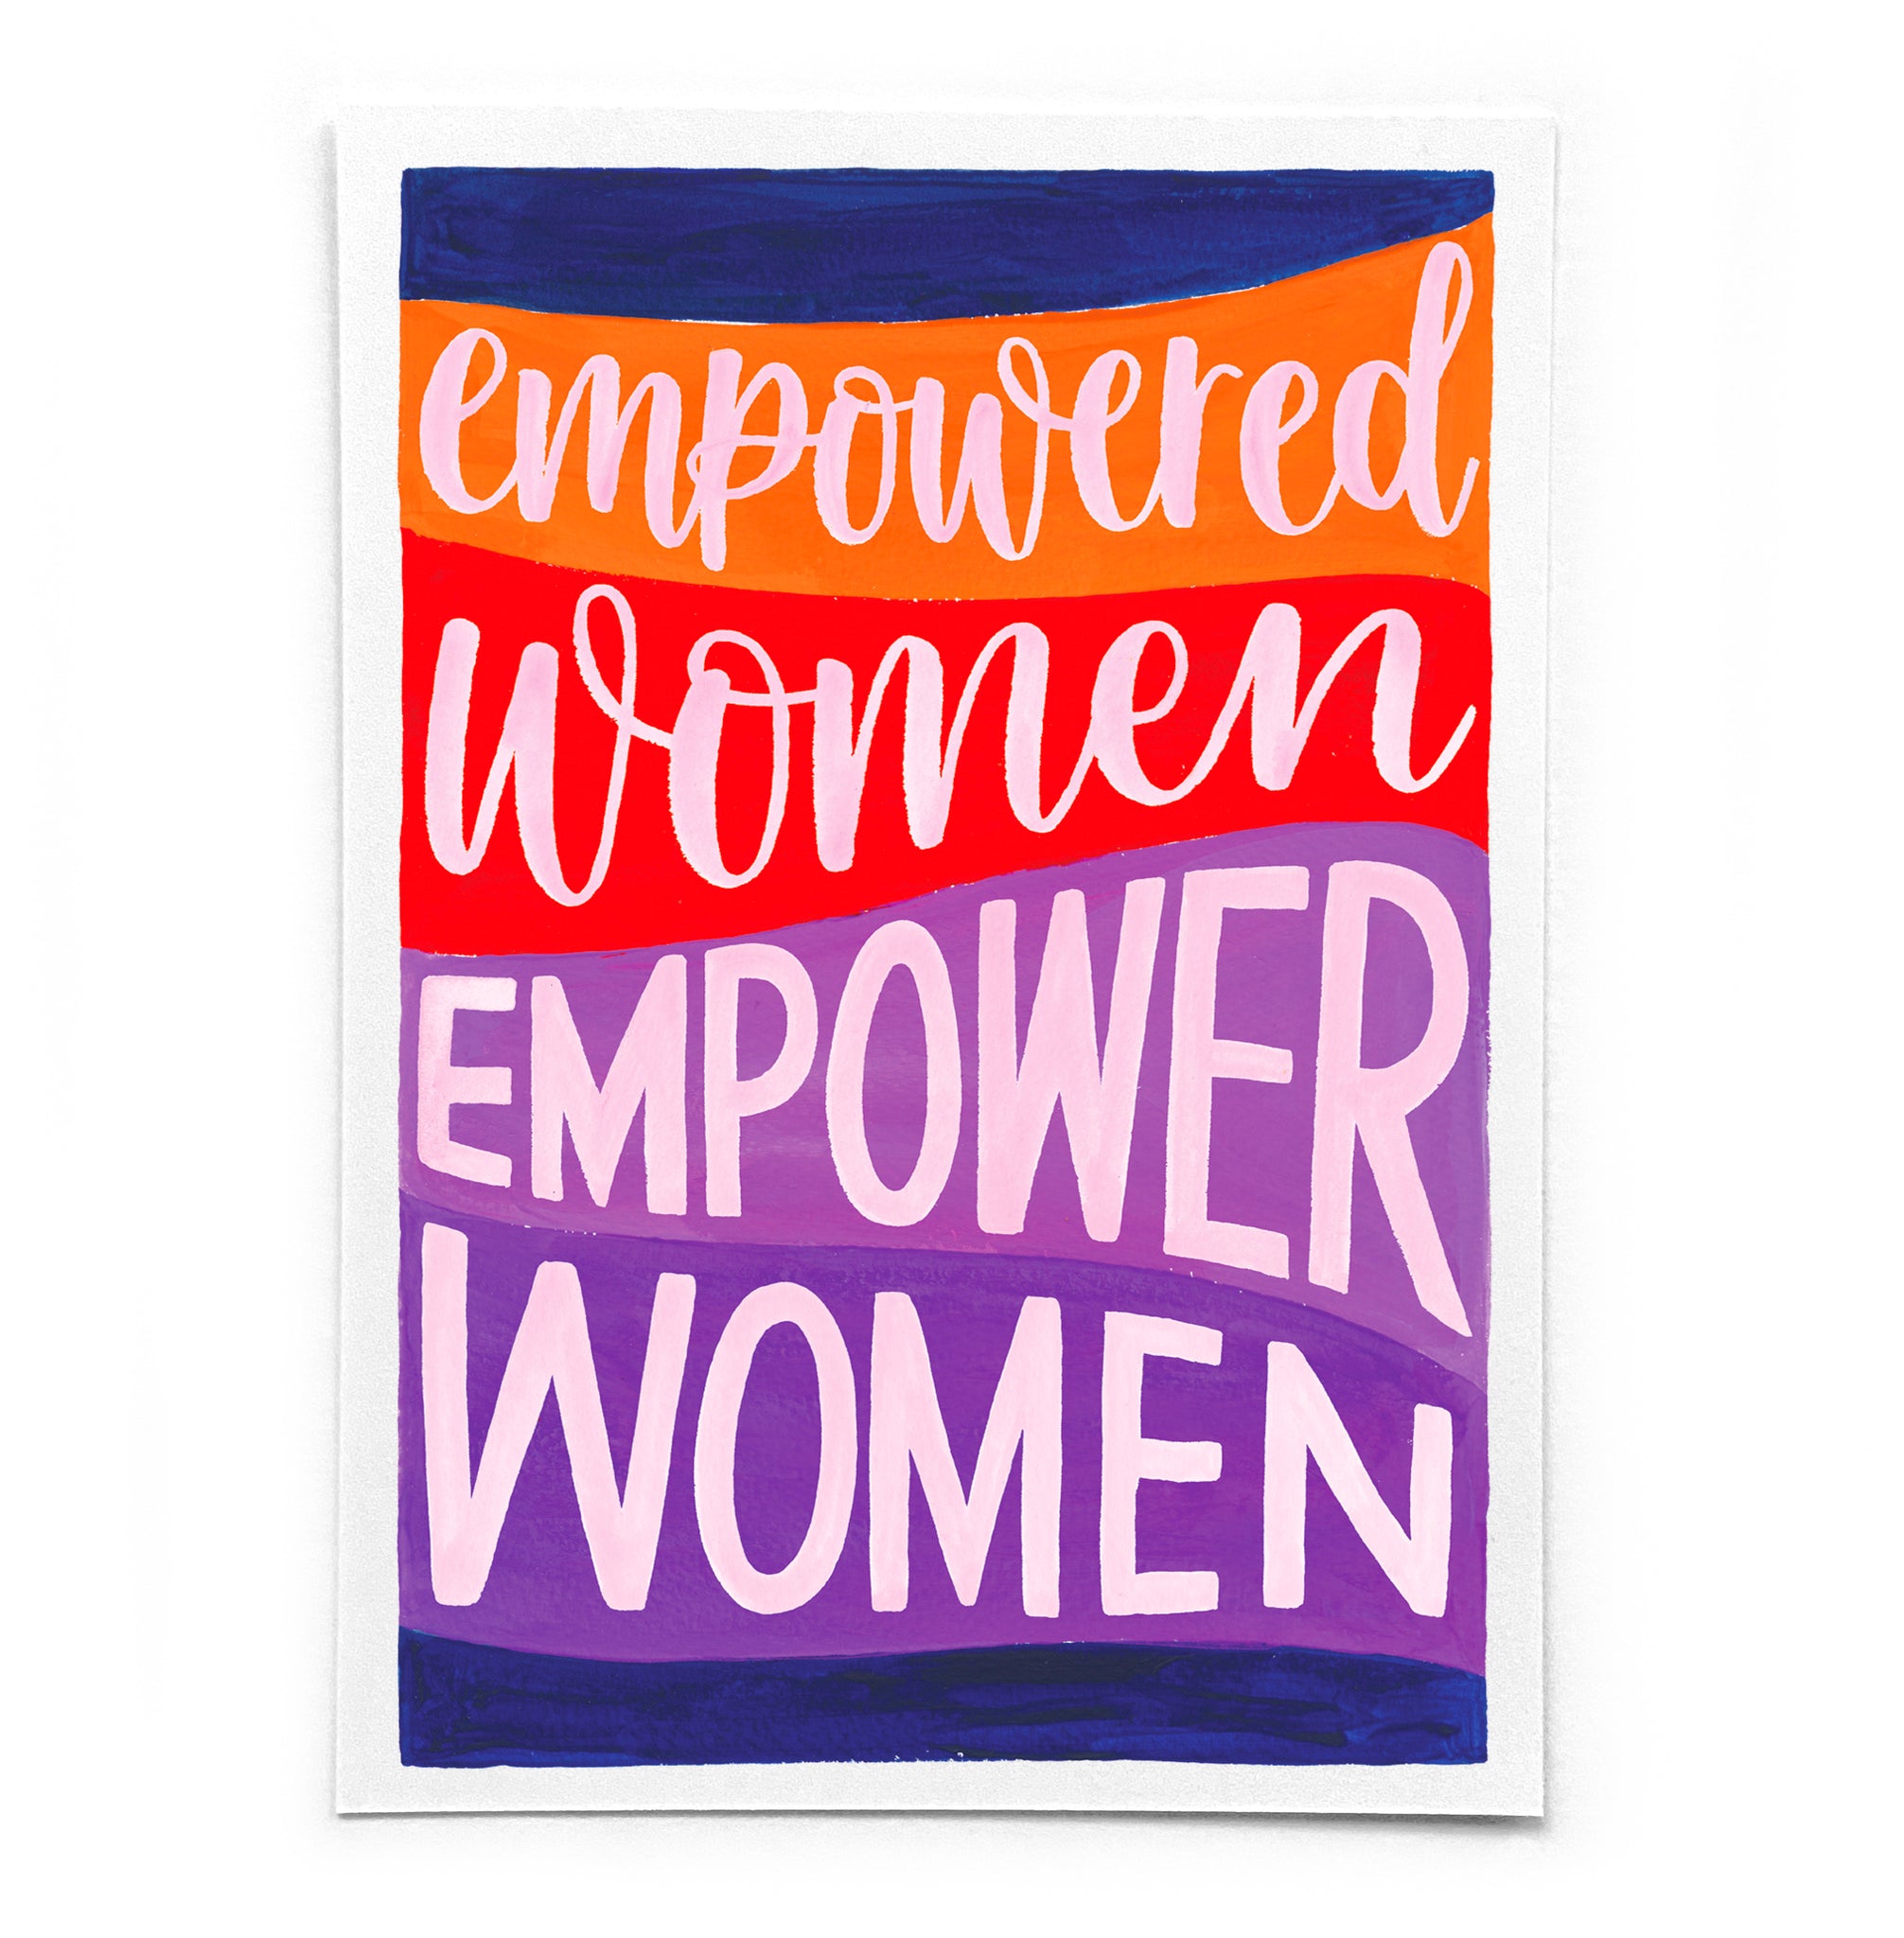 Colourful A6 postcard on recycled card - 'Empowered women empower women'